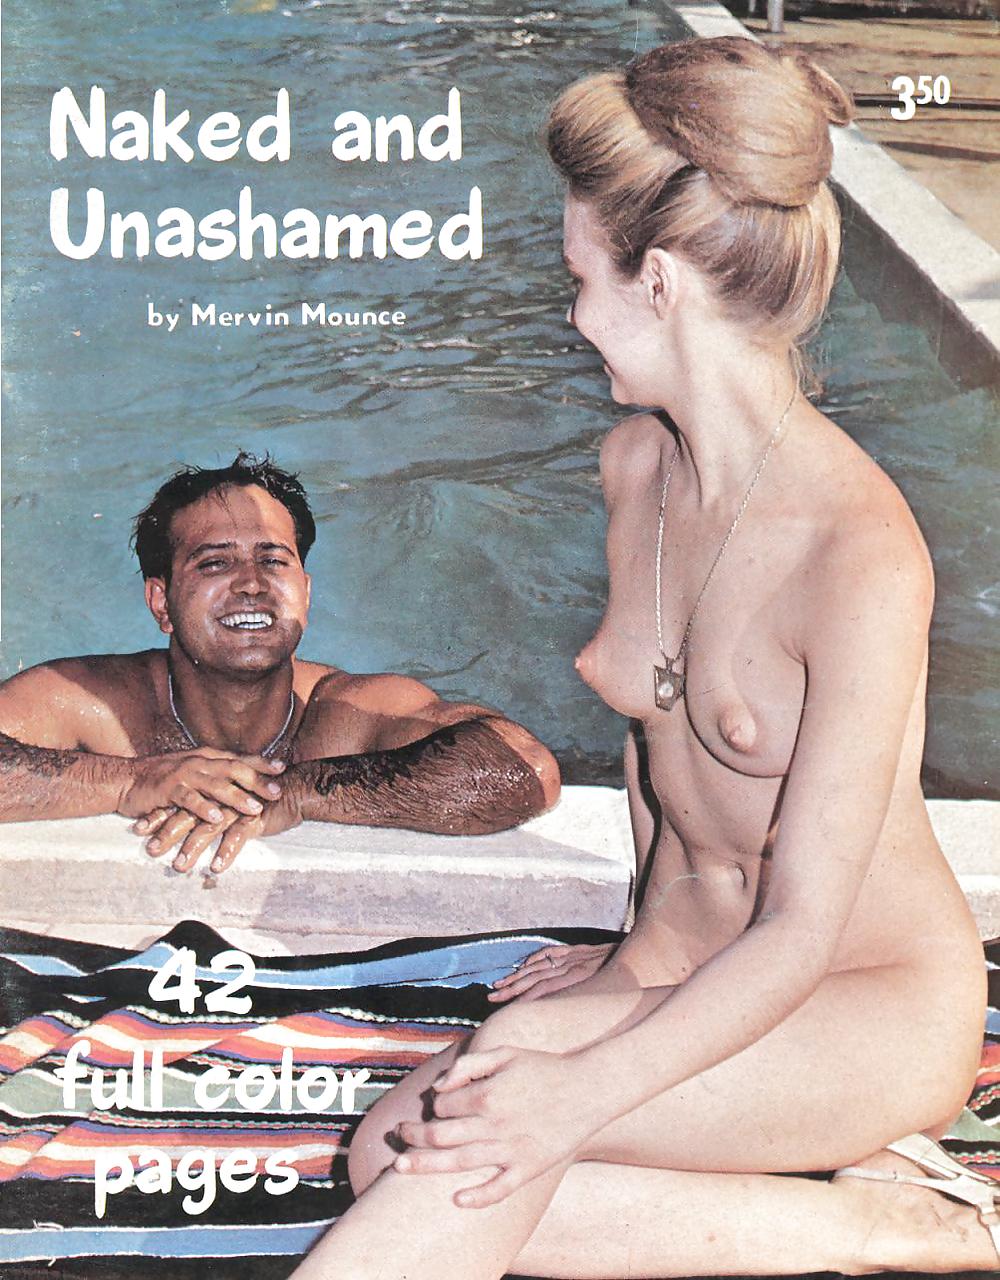 Nudist Sex Mags - Naked and Unashamed - Vintage Nudist Mag Porn Pictures, XXX Photos, Sex  Images #1354502 - PICTOA